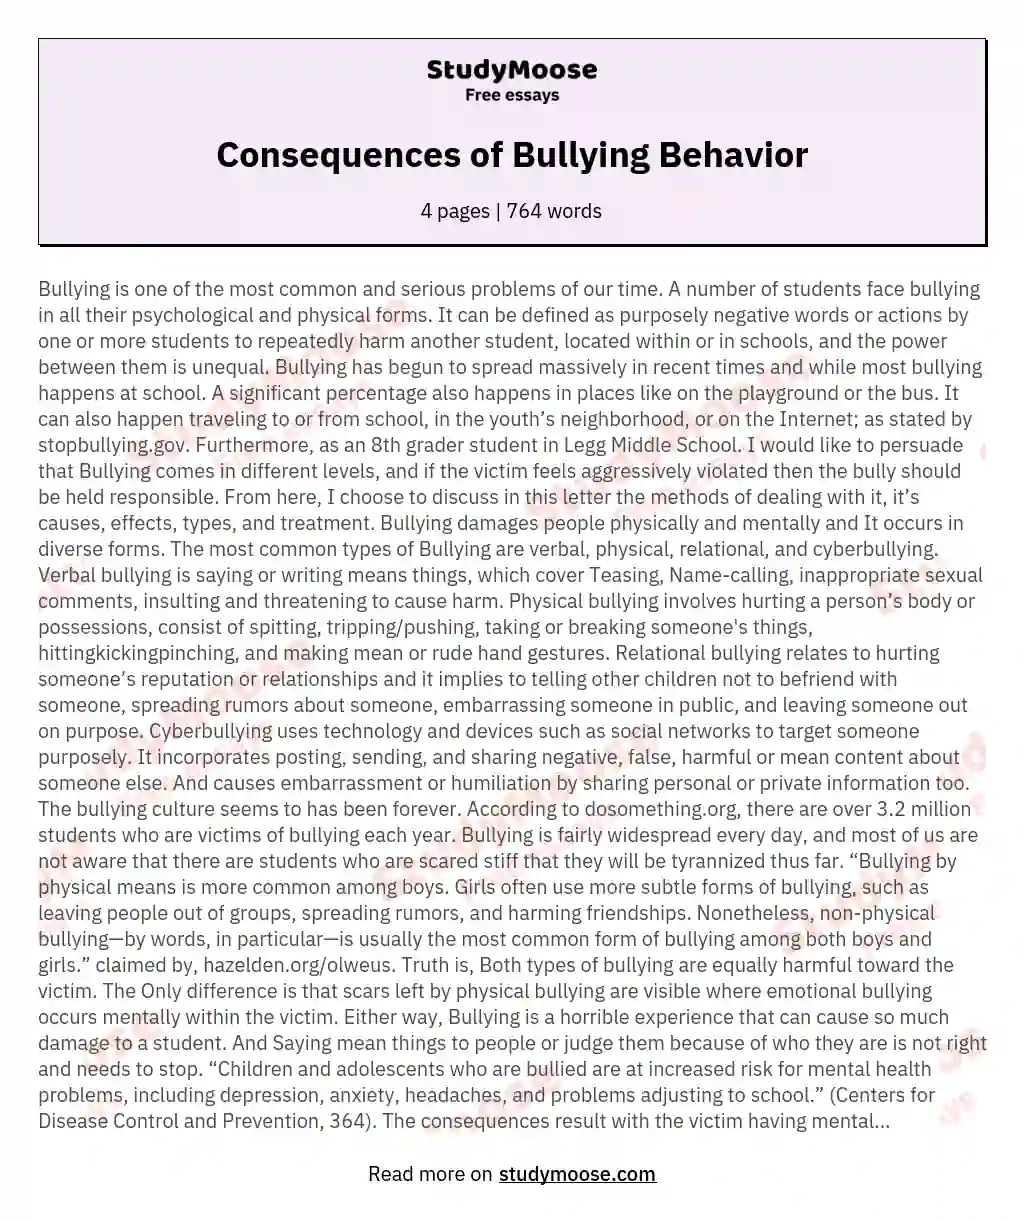 Consequences of Bullying Behavior essay